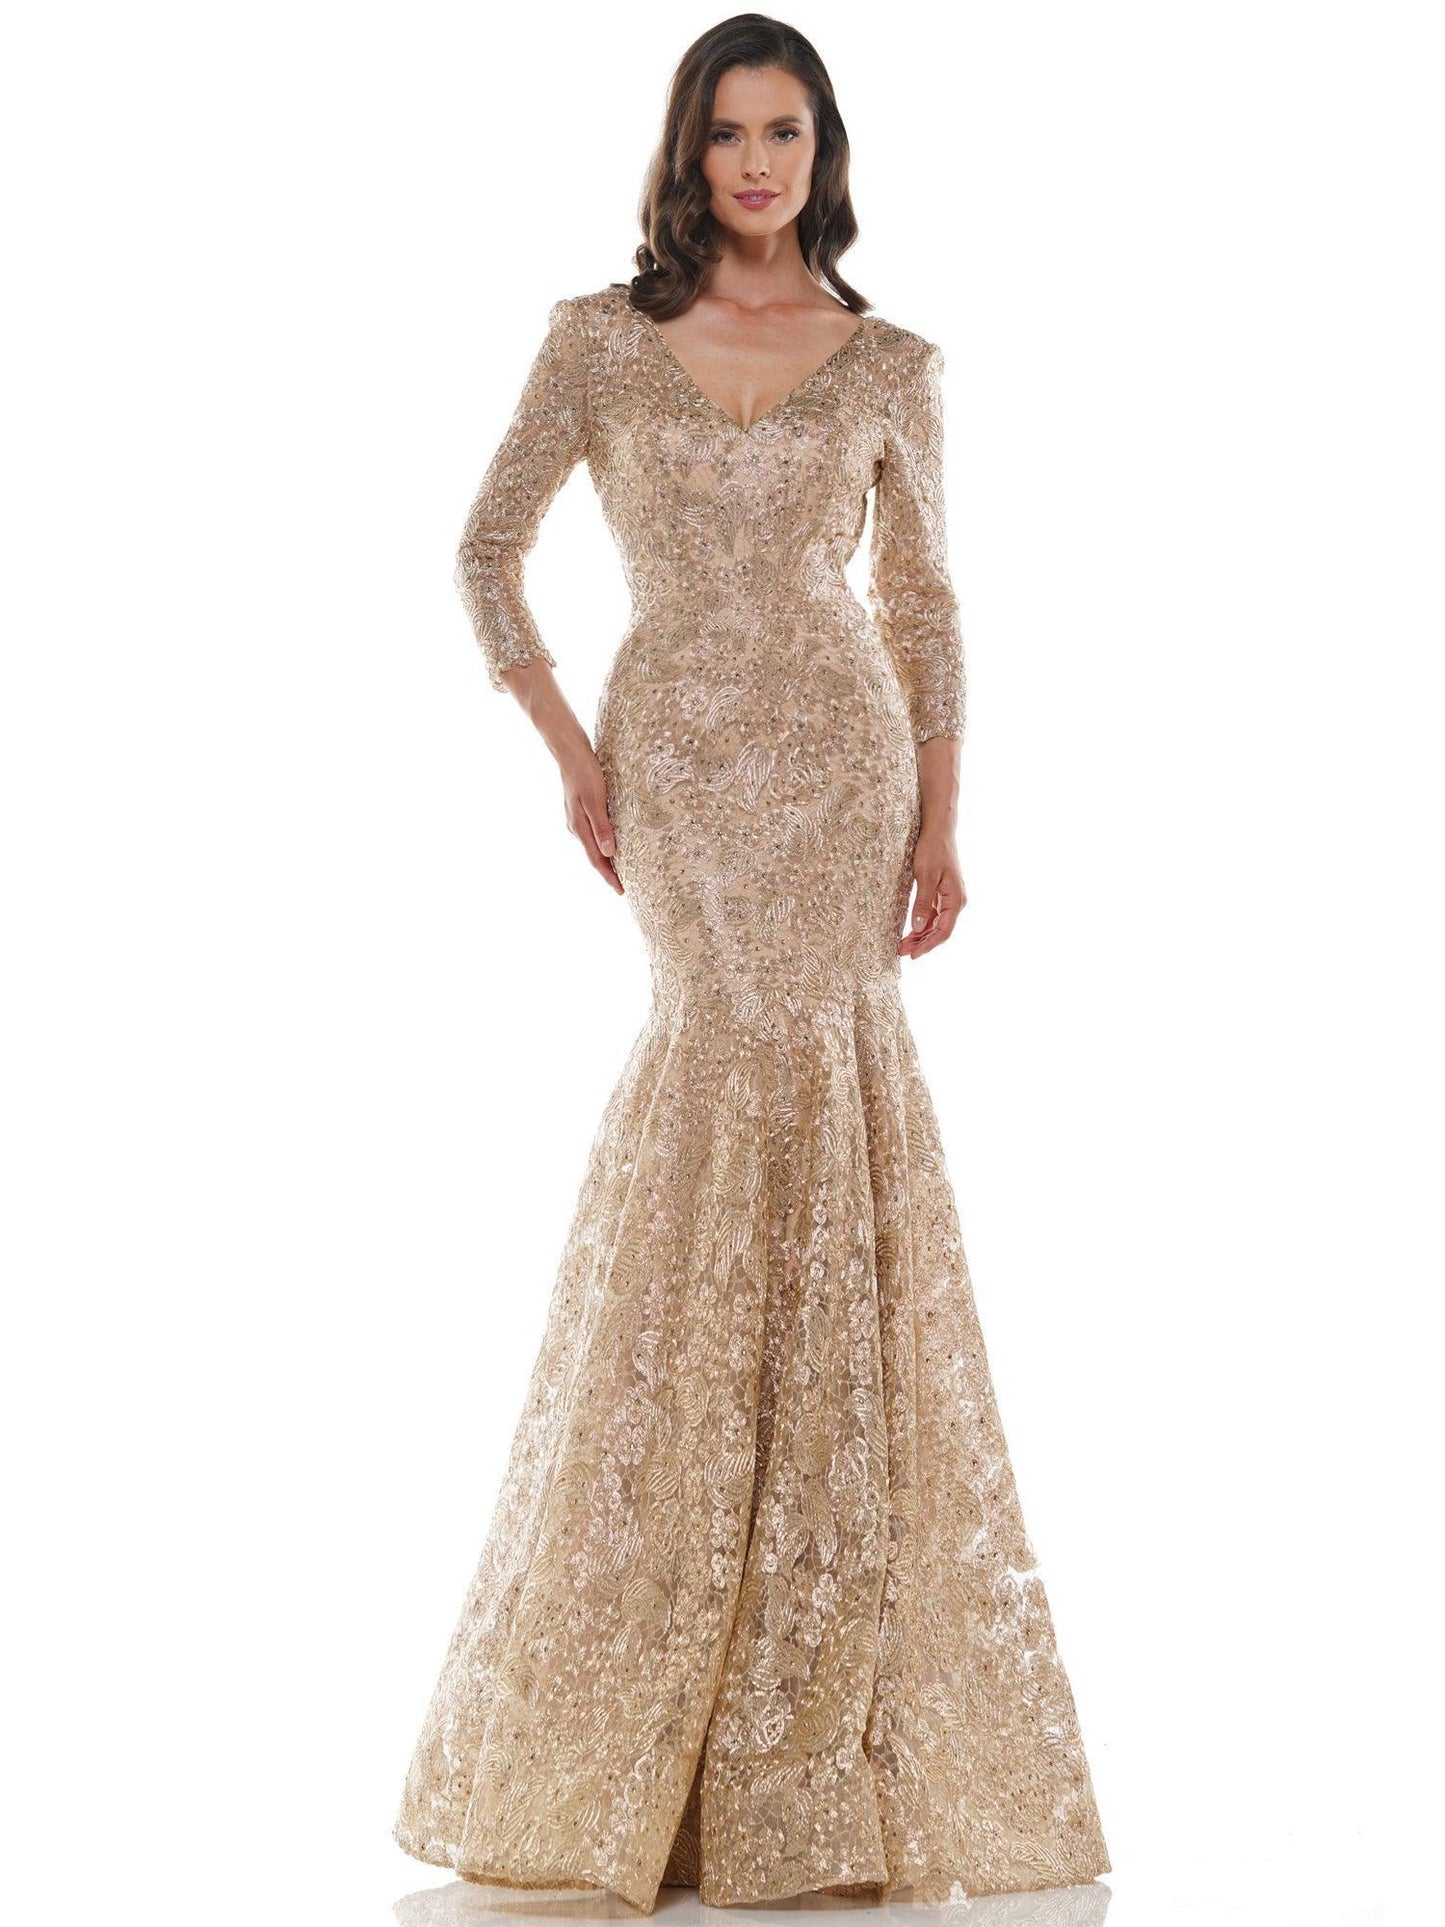 Marsoni Long Mother of the Bride Lace Dress  212SL - The Dress Outlet